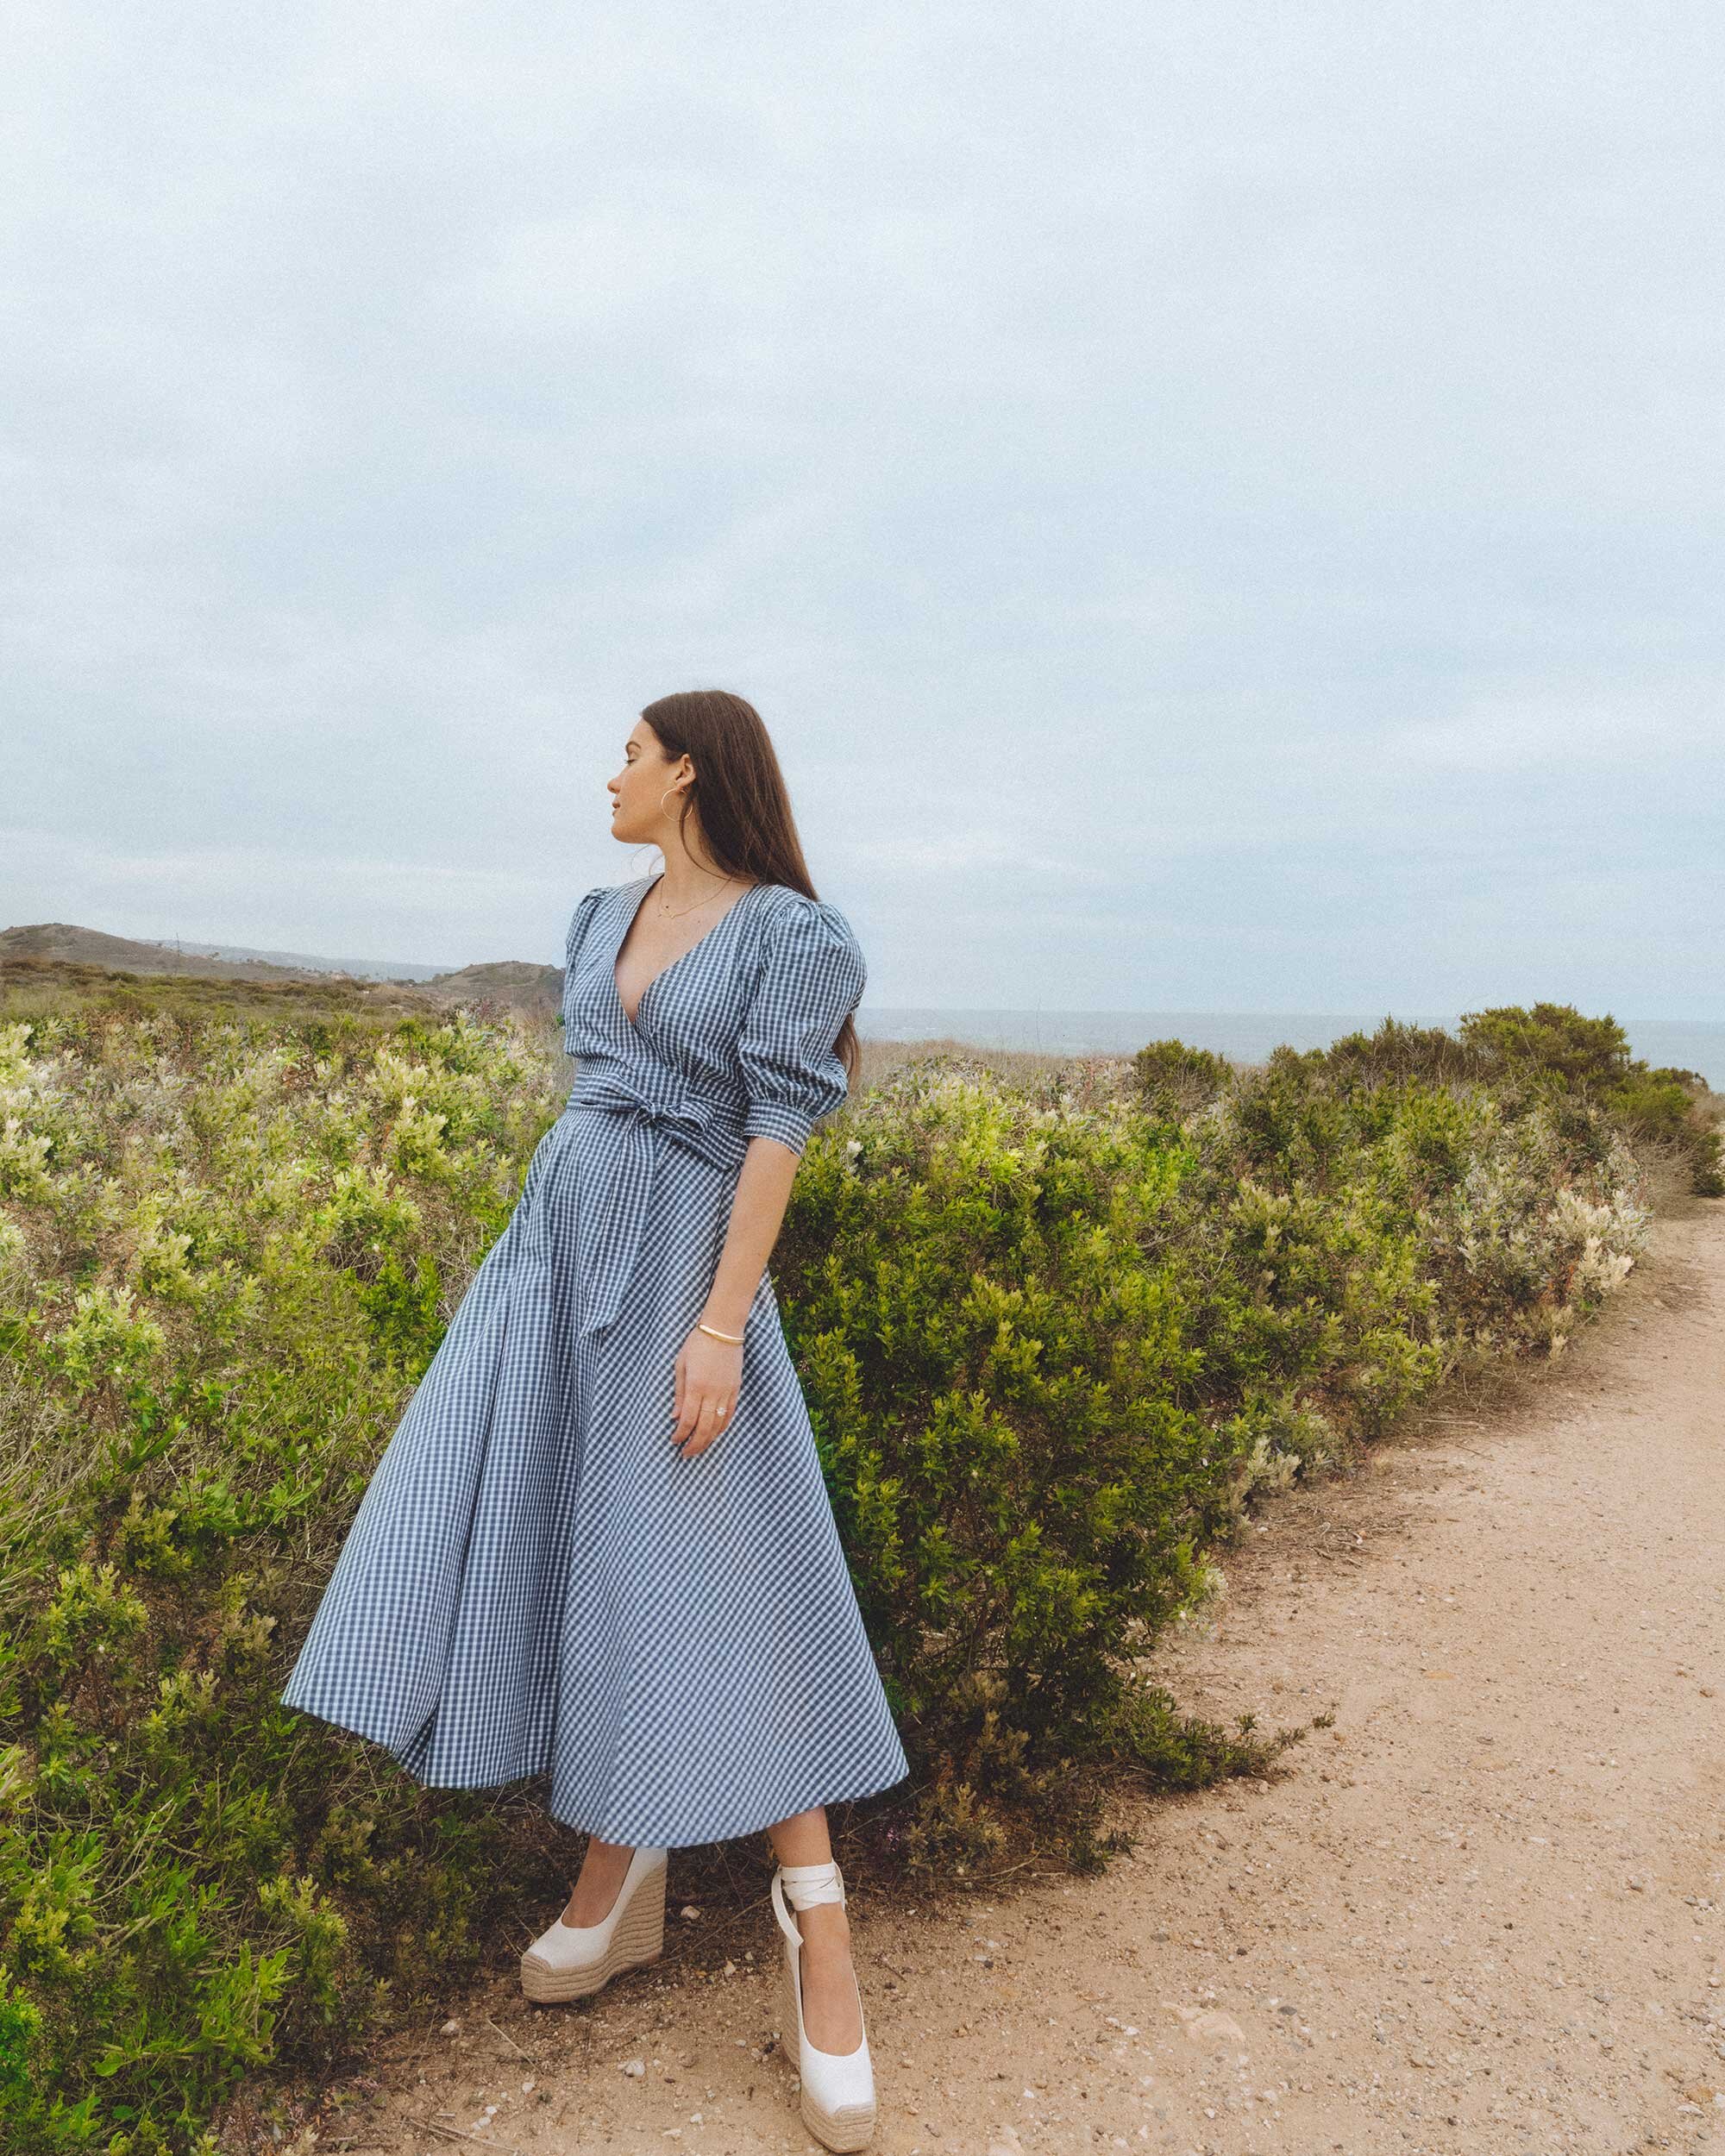 Feminine spring outfit idea: Gingham Cotton Wrap Dress. Sarah Butler of @sarahchristine wearing Polo Ralph Lauren Gingham Cotton Wrap Dress and white Leather Espadrilles in California - 6.jpg